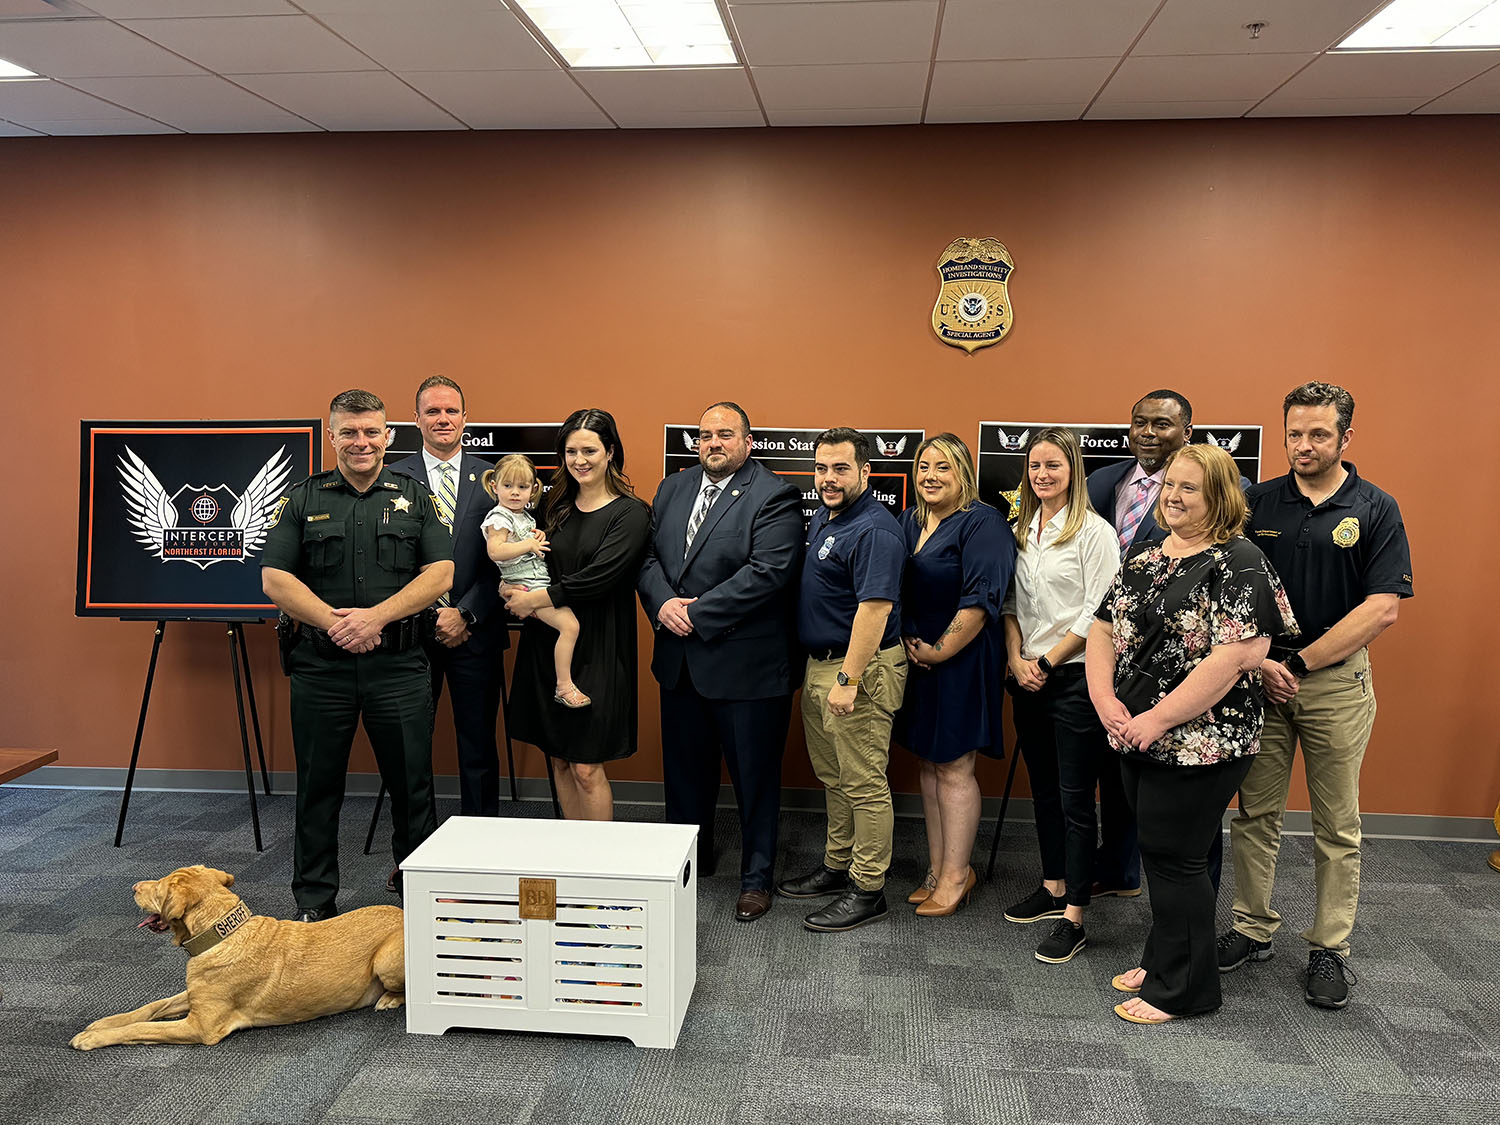 HSI Jacksonville special agents, task force officers and Northeast Florida INTERCEPT Task Force law enforcement partners received the 50th Bexley Box from the Bridegan Foundation. Kirsten Bridegan created the “Bexley Box” to turn a tragic personal experience into an ongoing act of compassion aimed at helping children who find themselves in the middle of crime scenes or investigations.